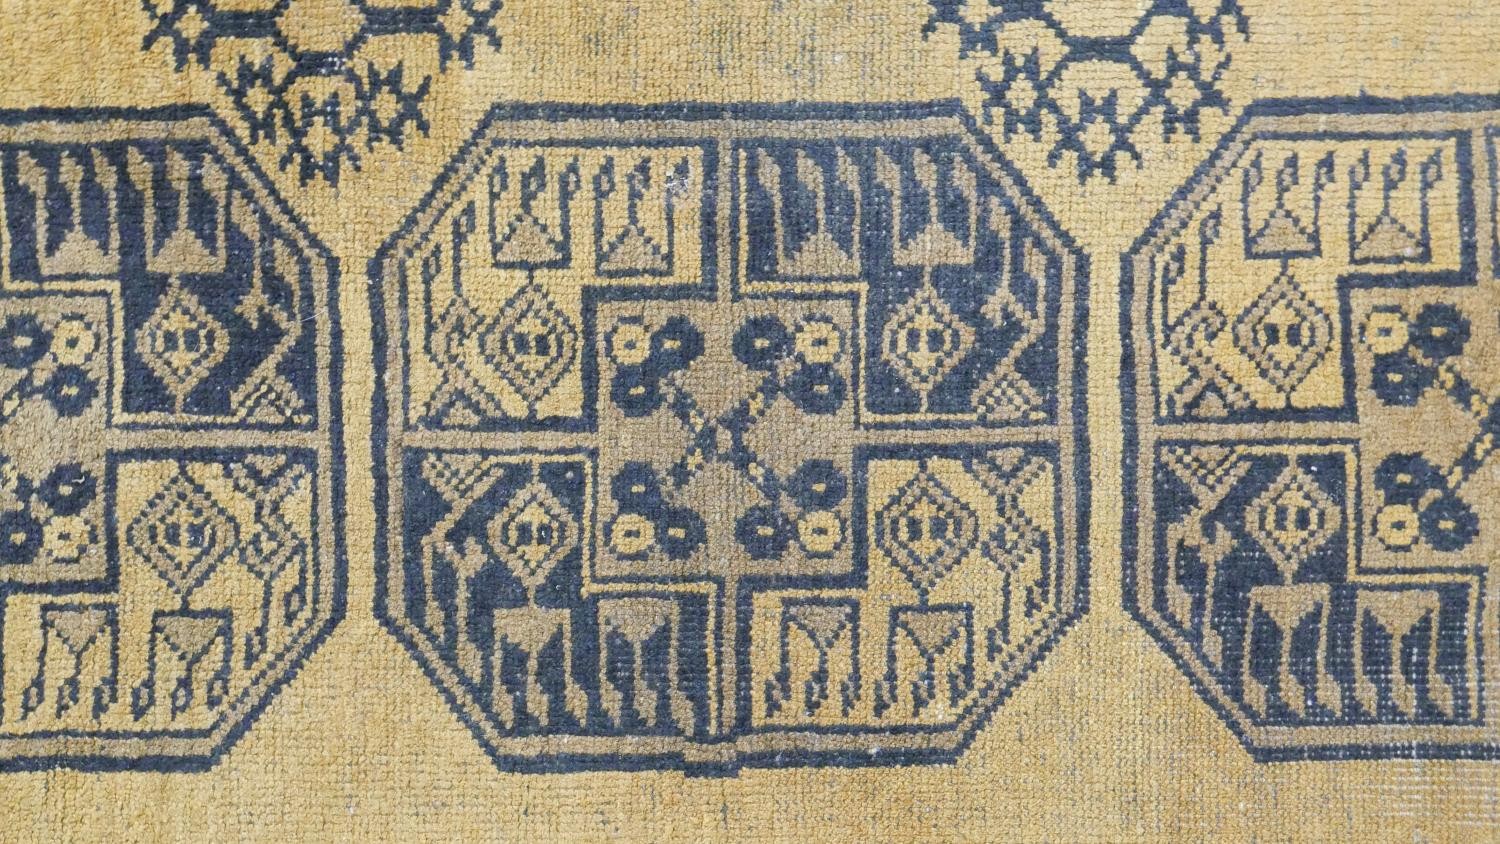 A hand made Afghan carpet with repeating gul medallions on a gold ground contained within multiple - Image 6 of 7